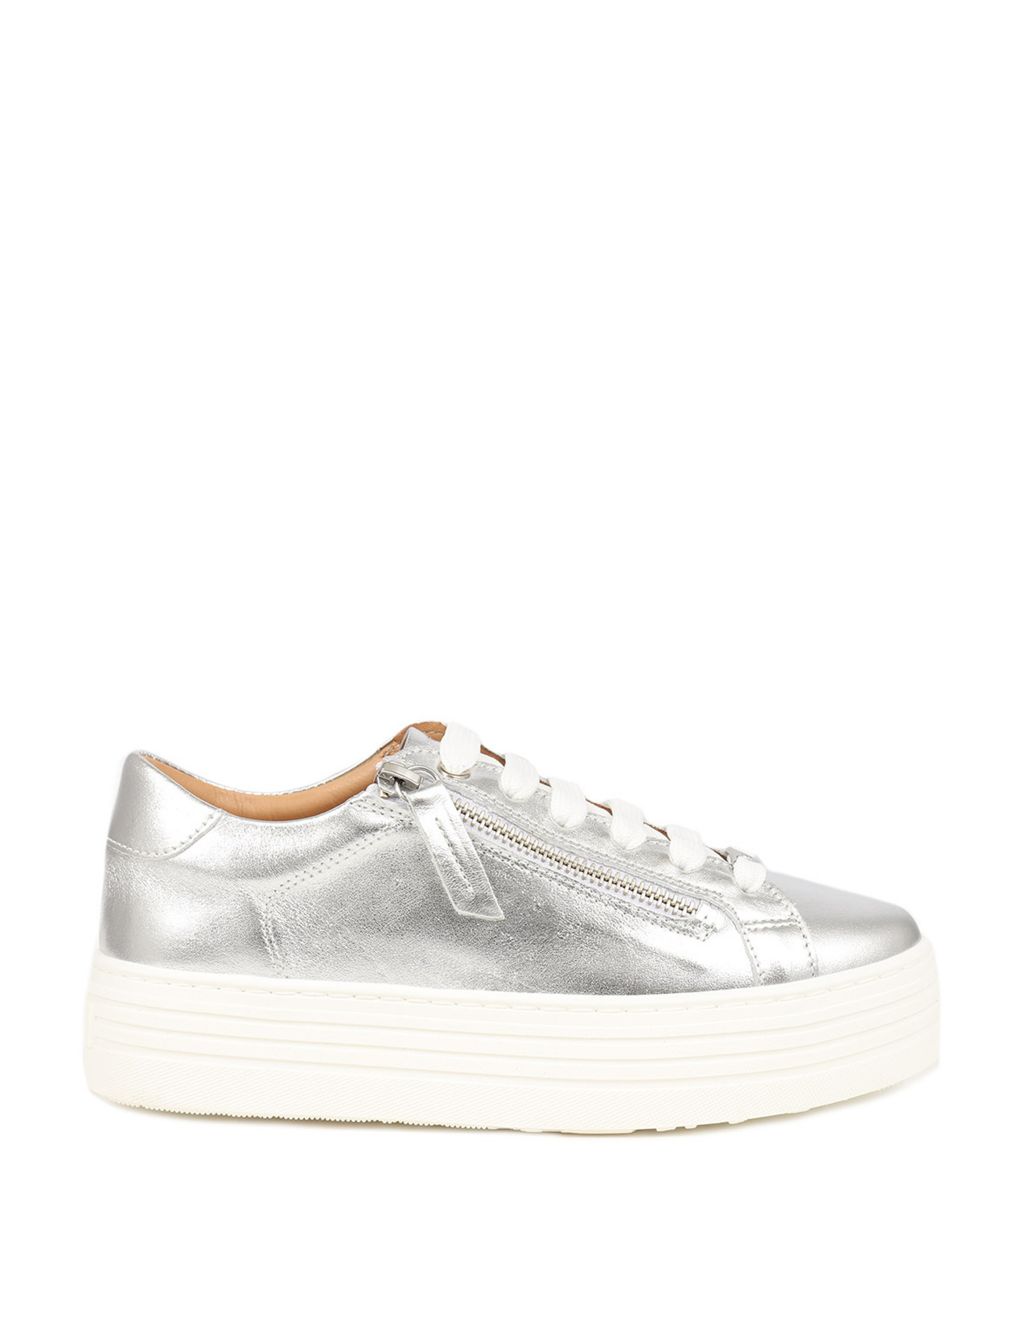 Leather Lace Up Flatform Trainers image 2